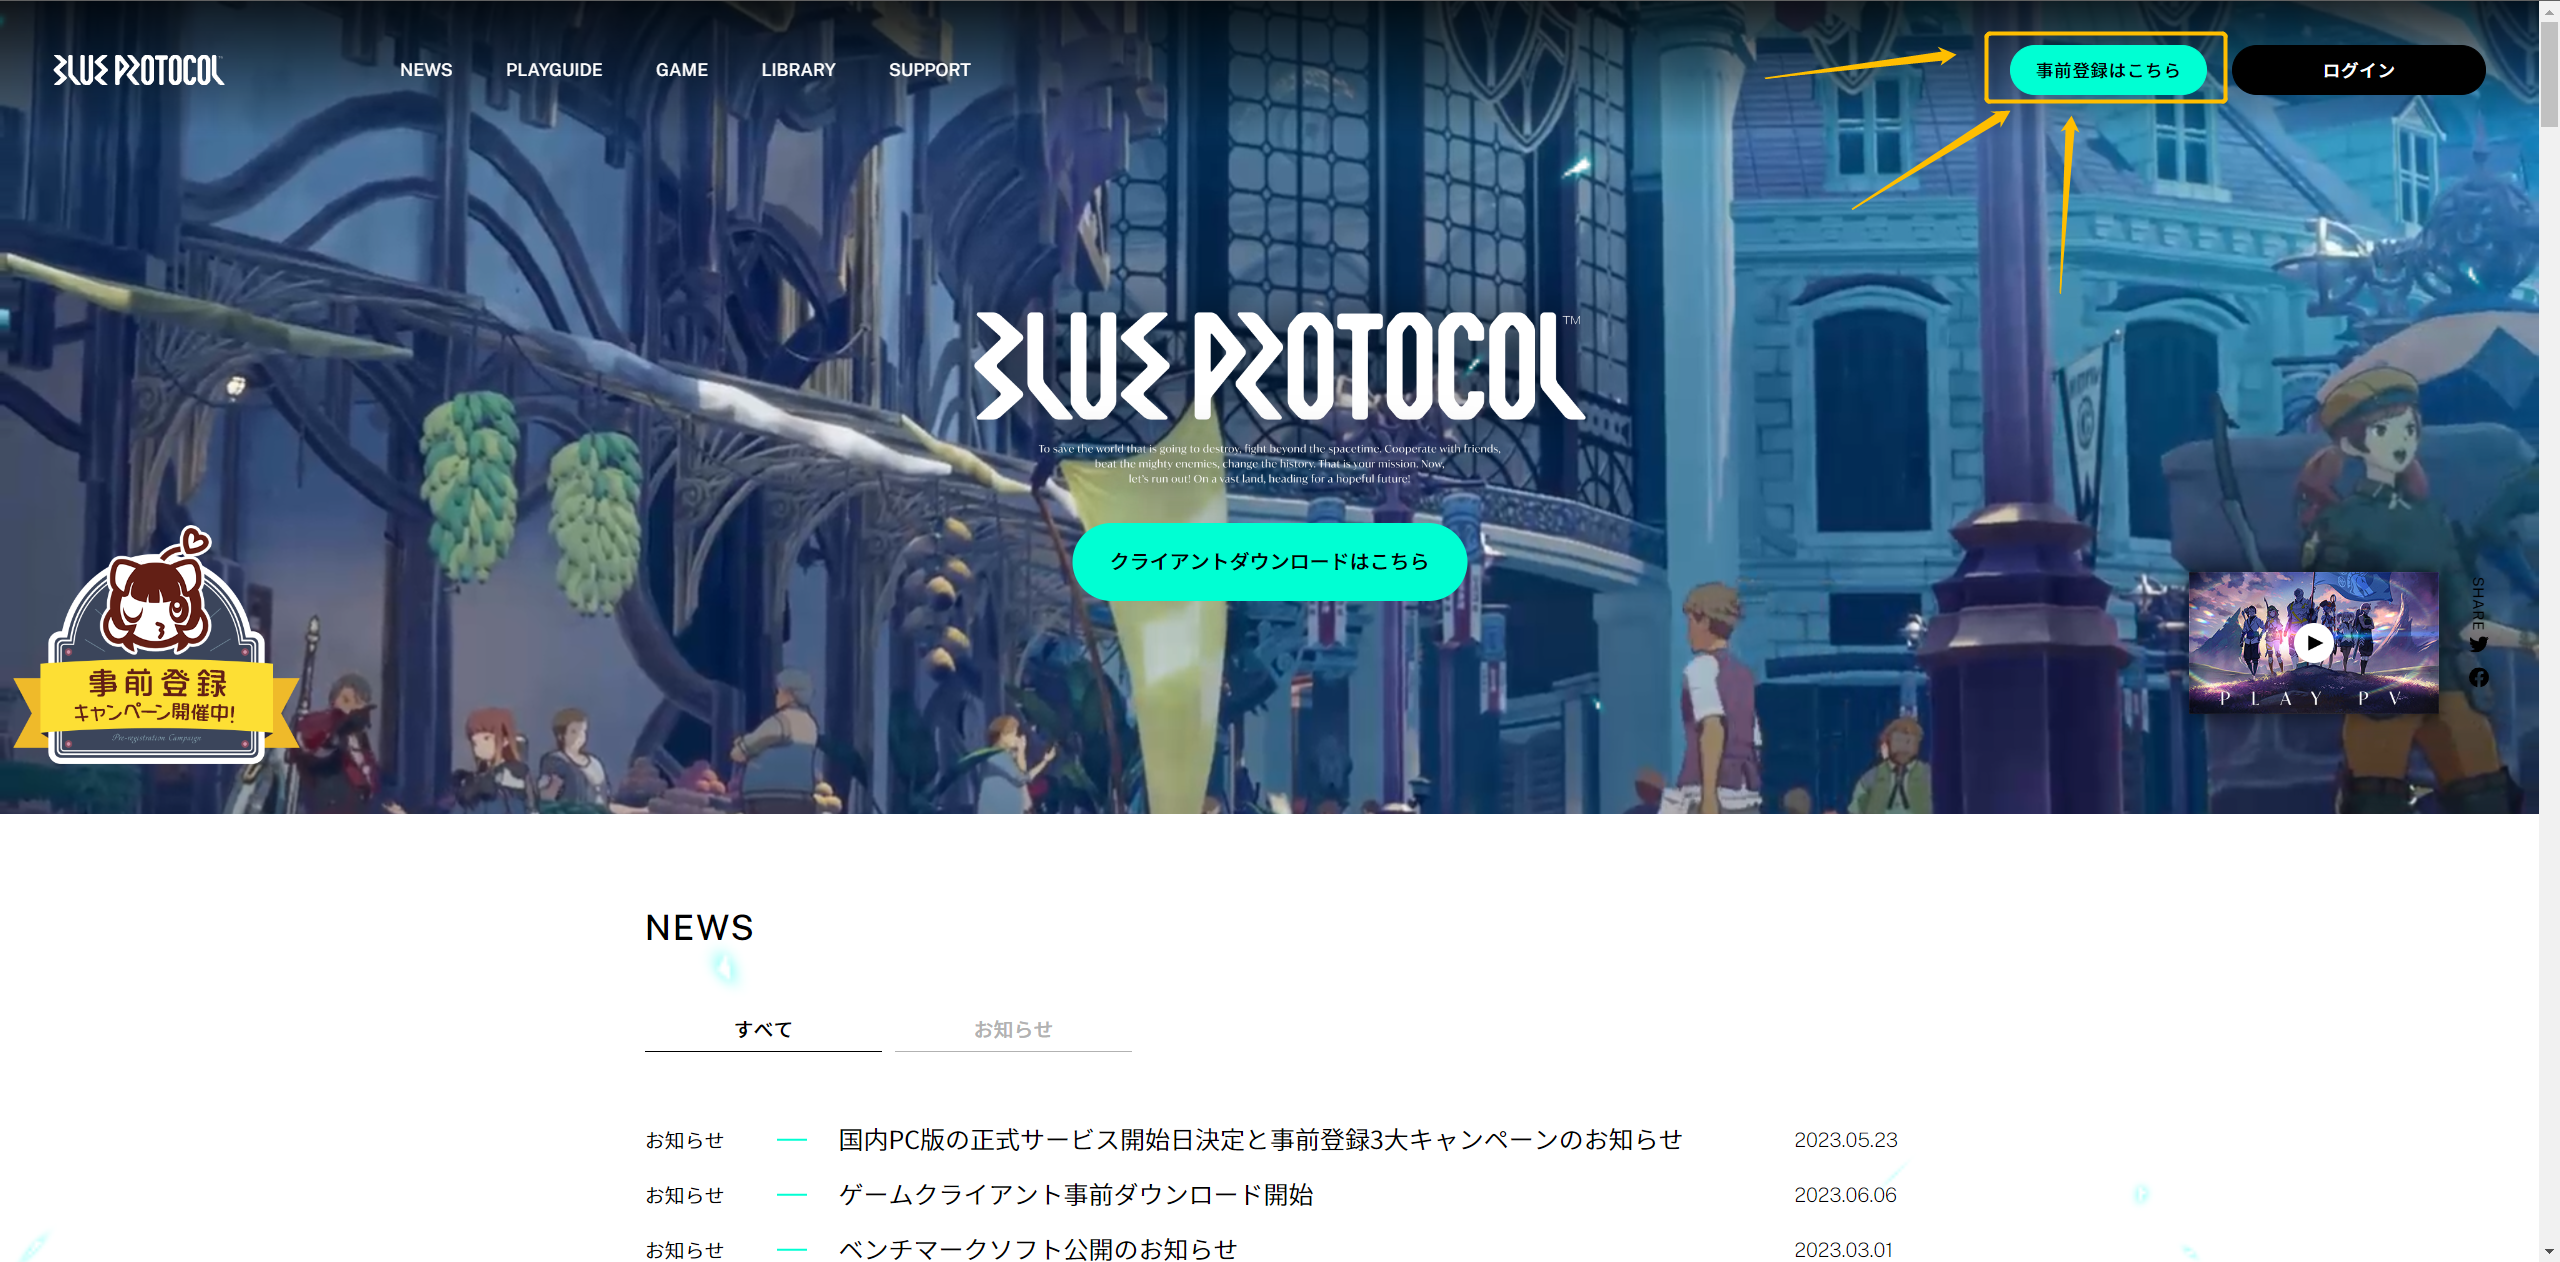 Do You Need a VPN to Play Blue Protocol on the Japanese Servers